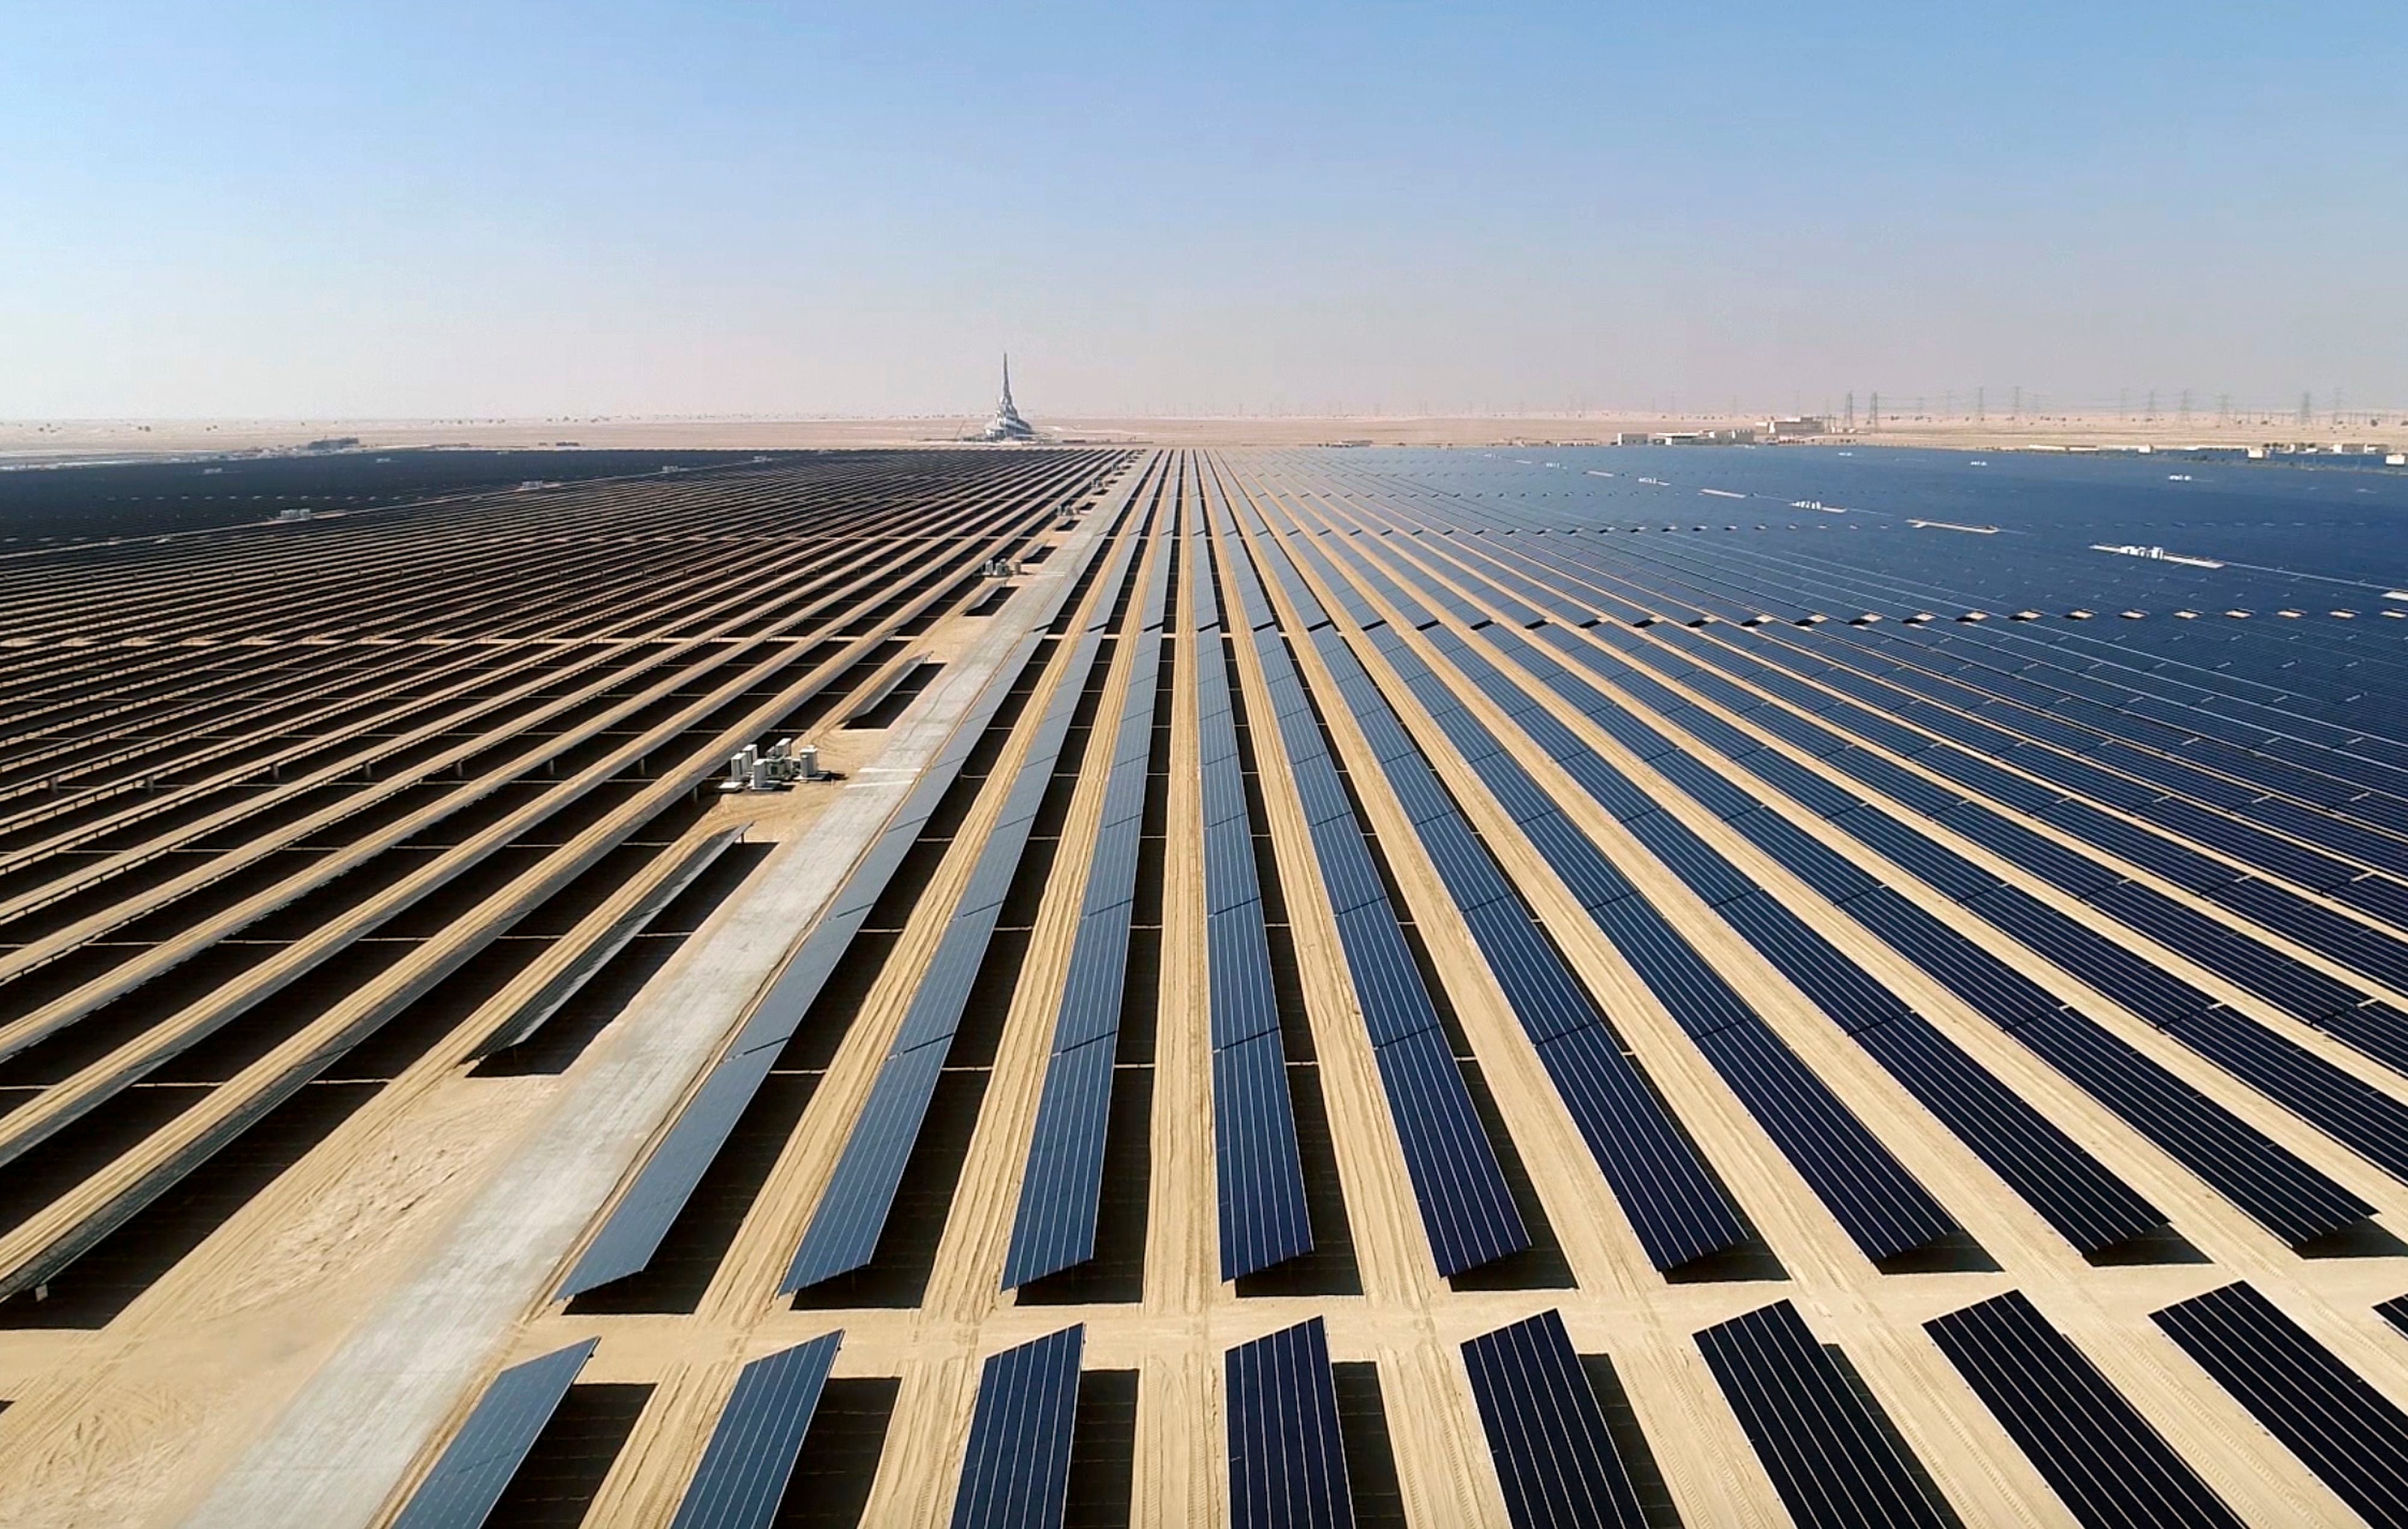 Mena offers 'huge economic opportunity' as world focuses on energy transition